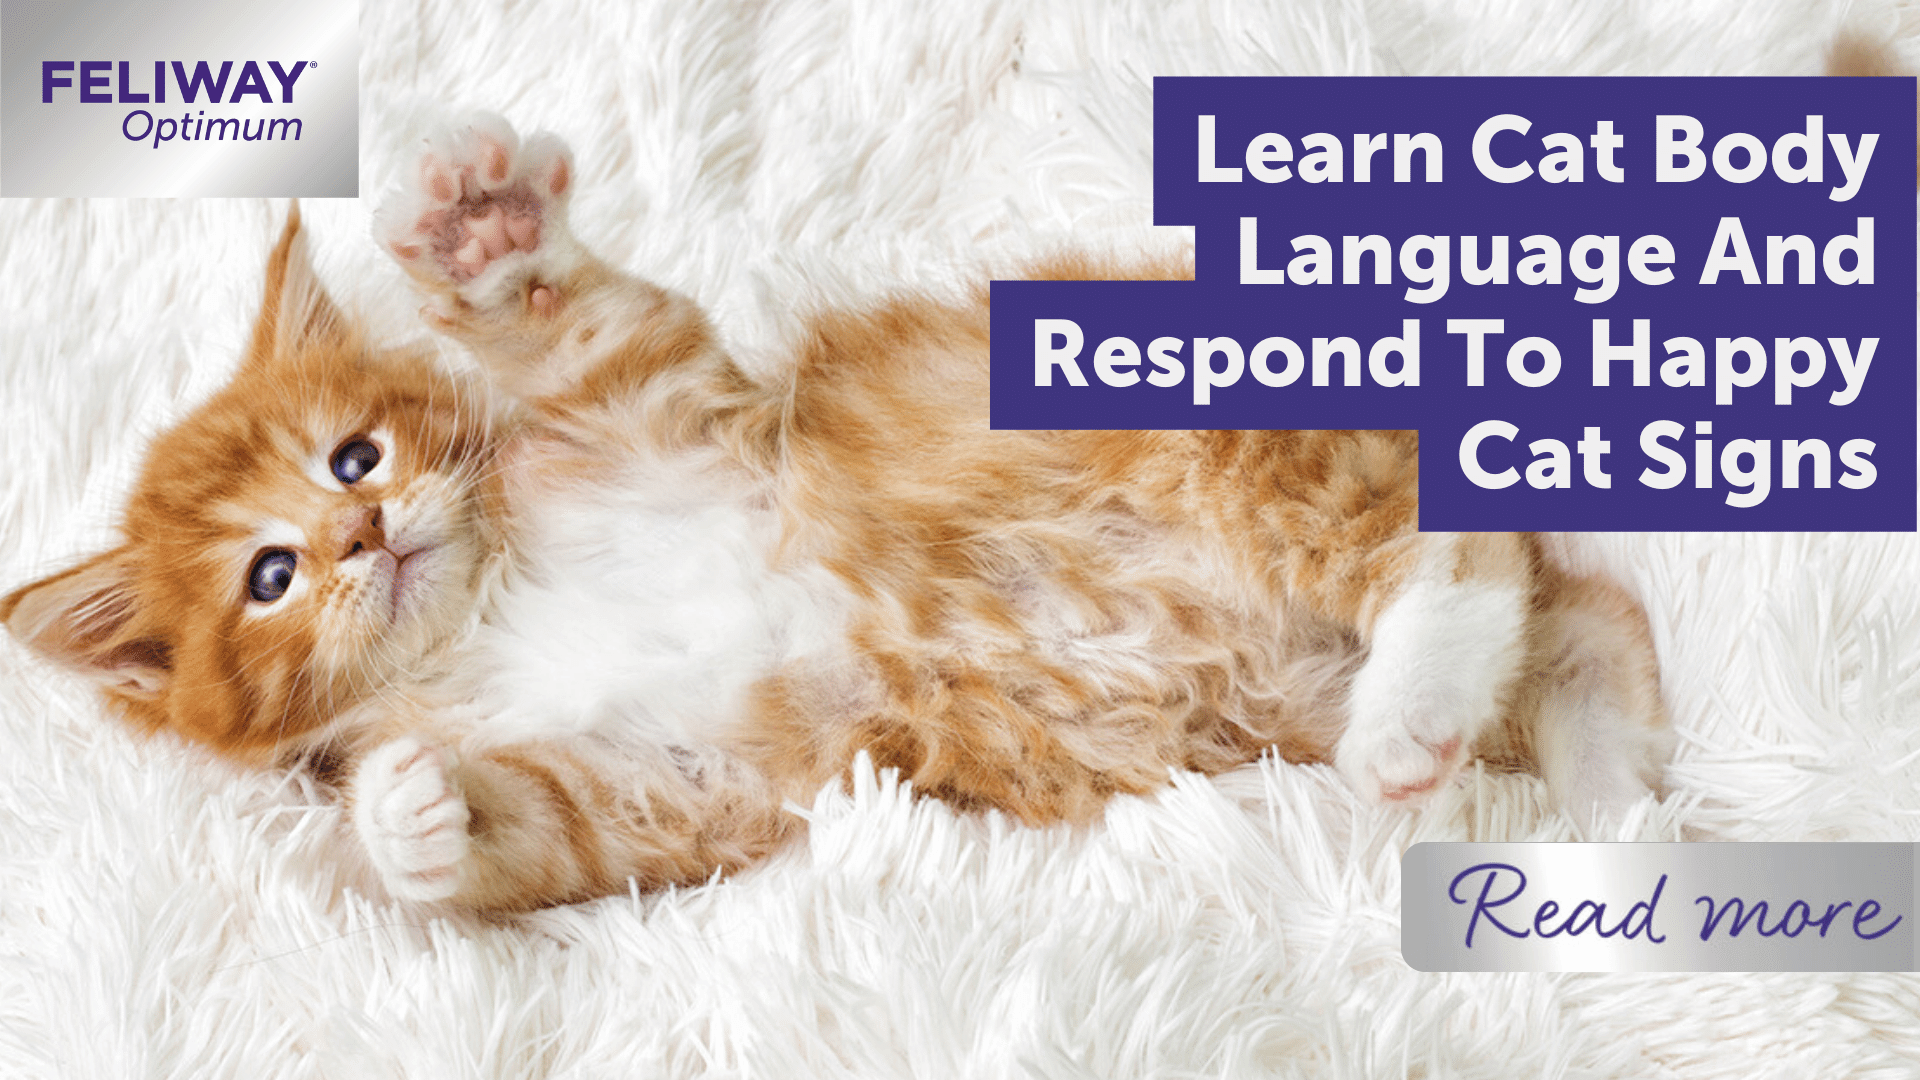 Learn Cat Body Language And Respond To Happy Cat Signs